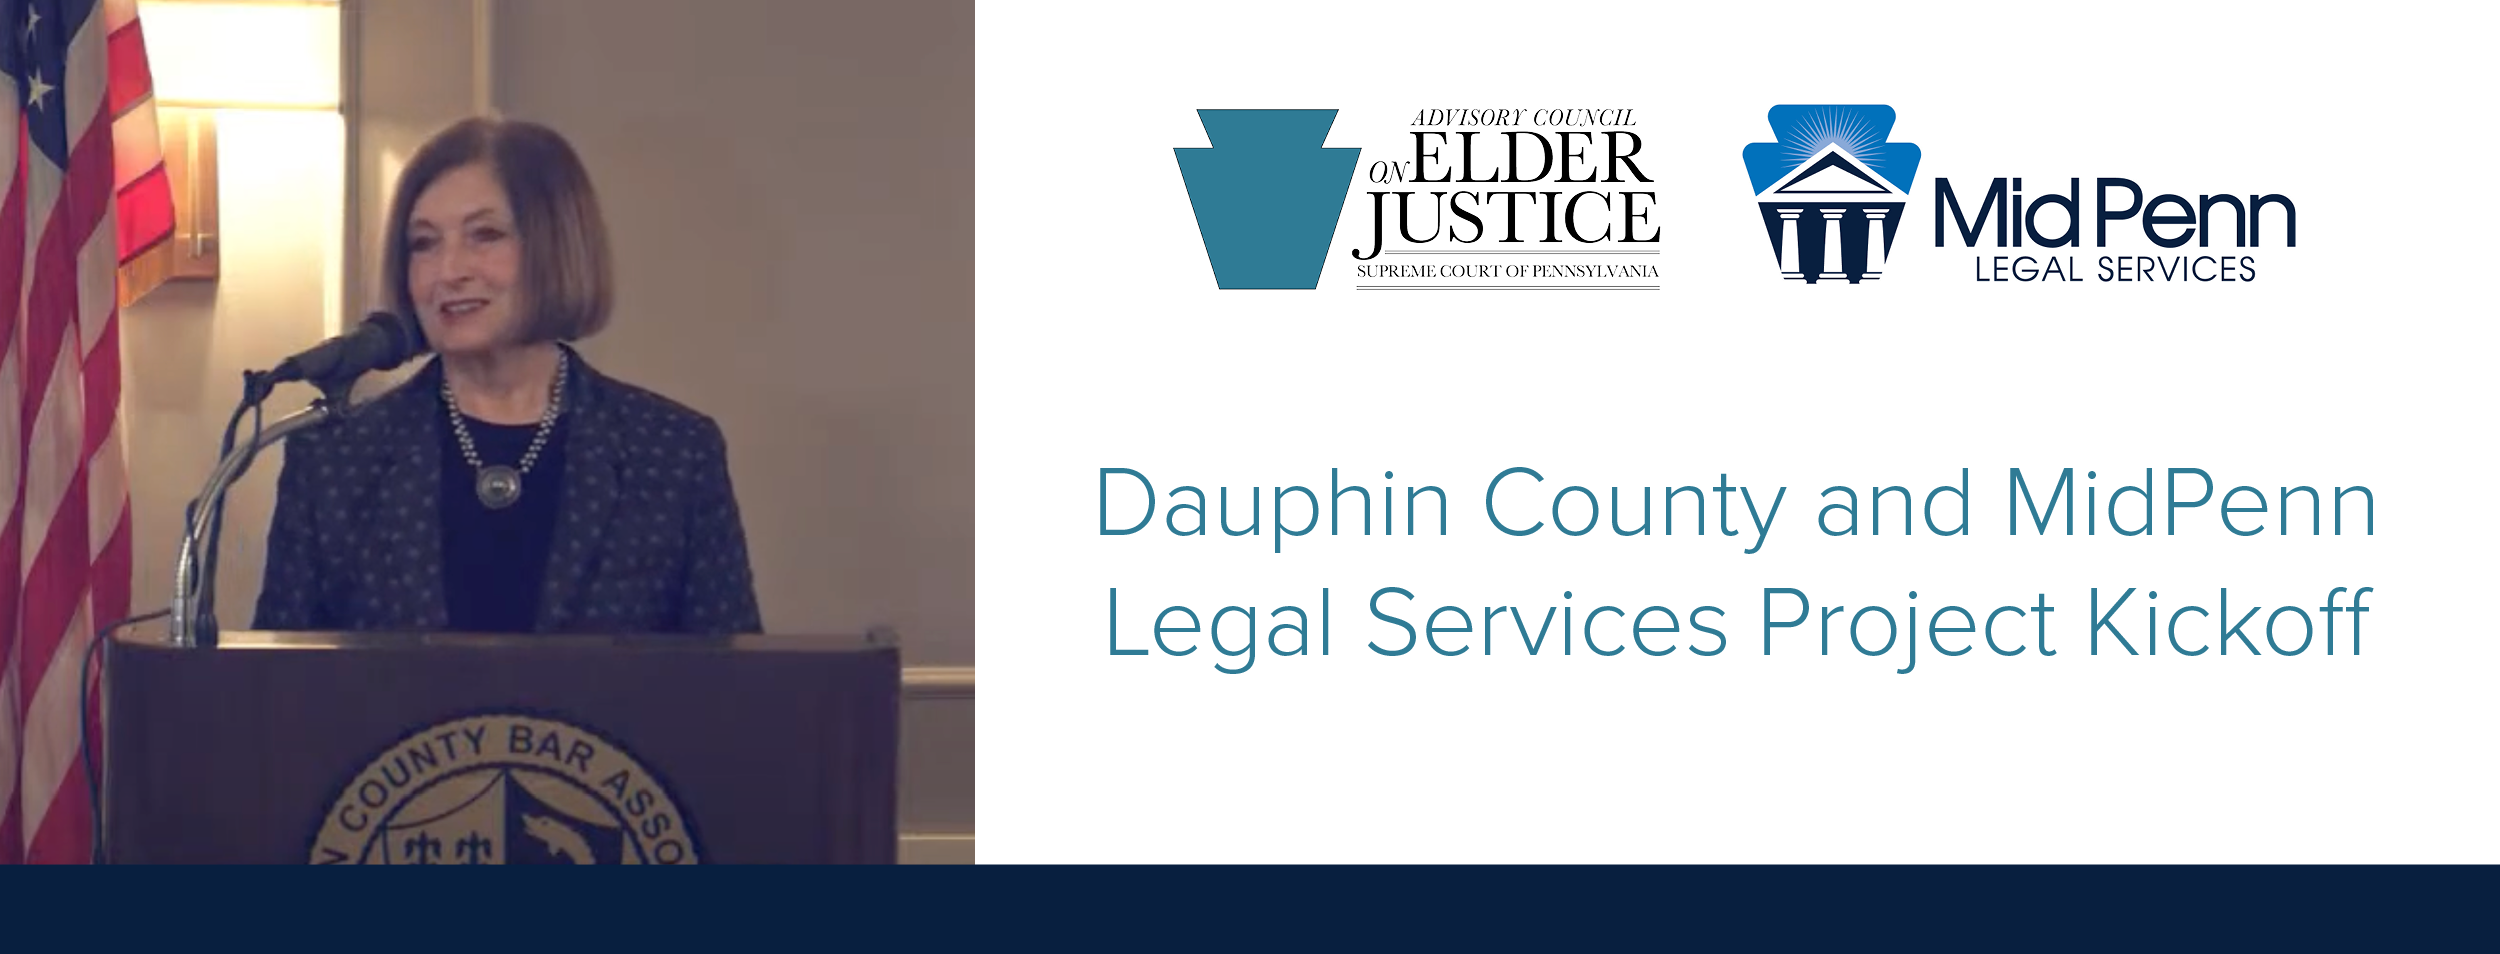 Dauphin County & MidPenn Legal Services Project Kickoff video